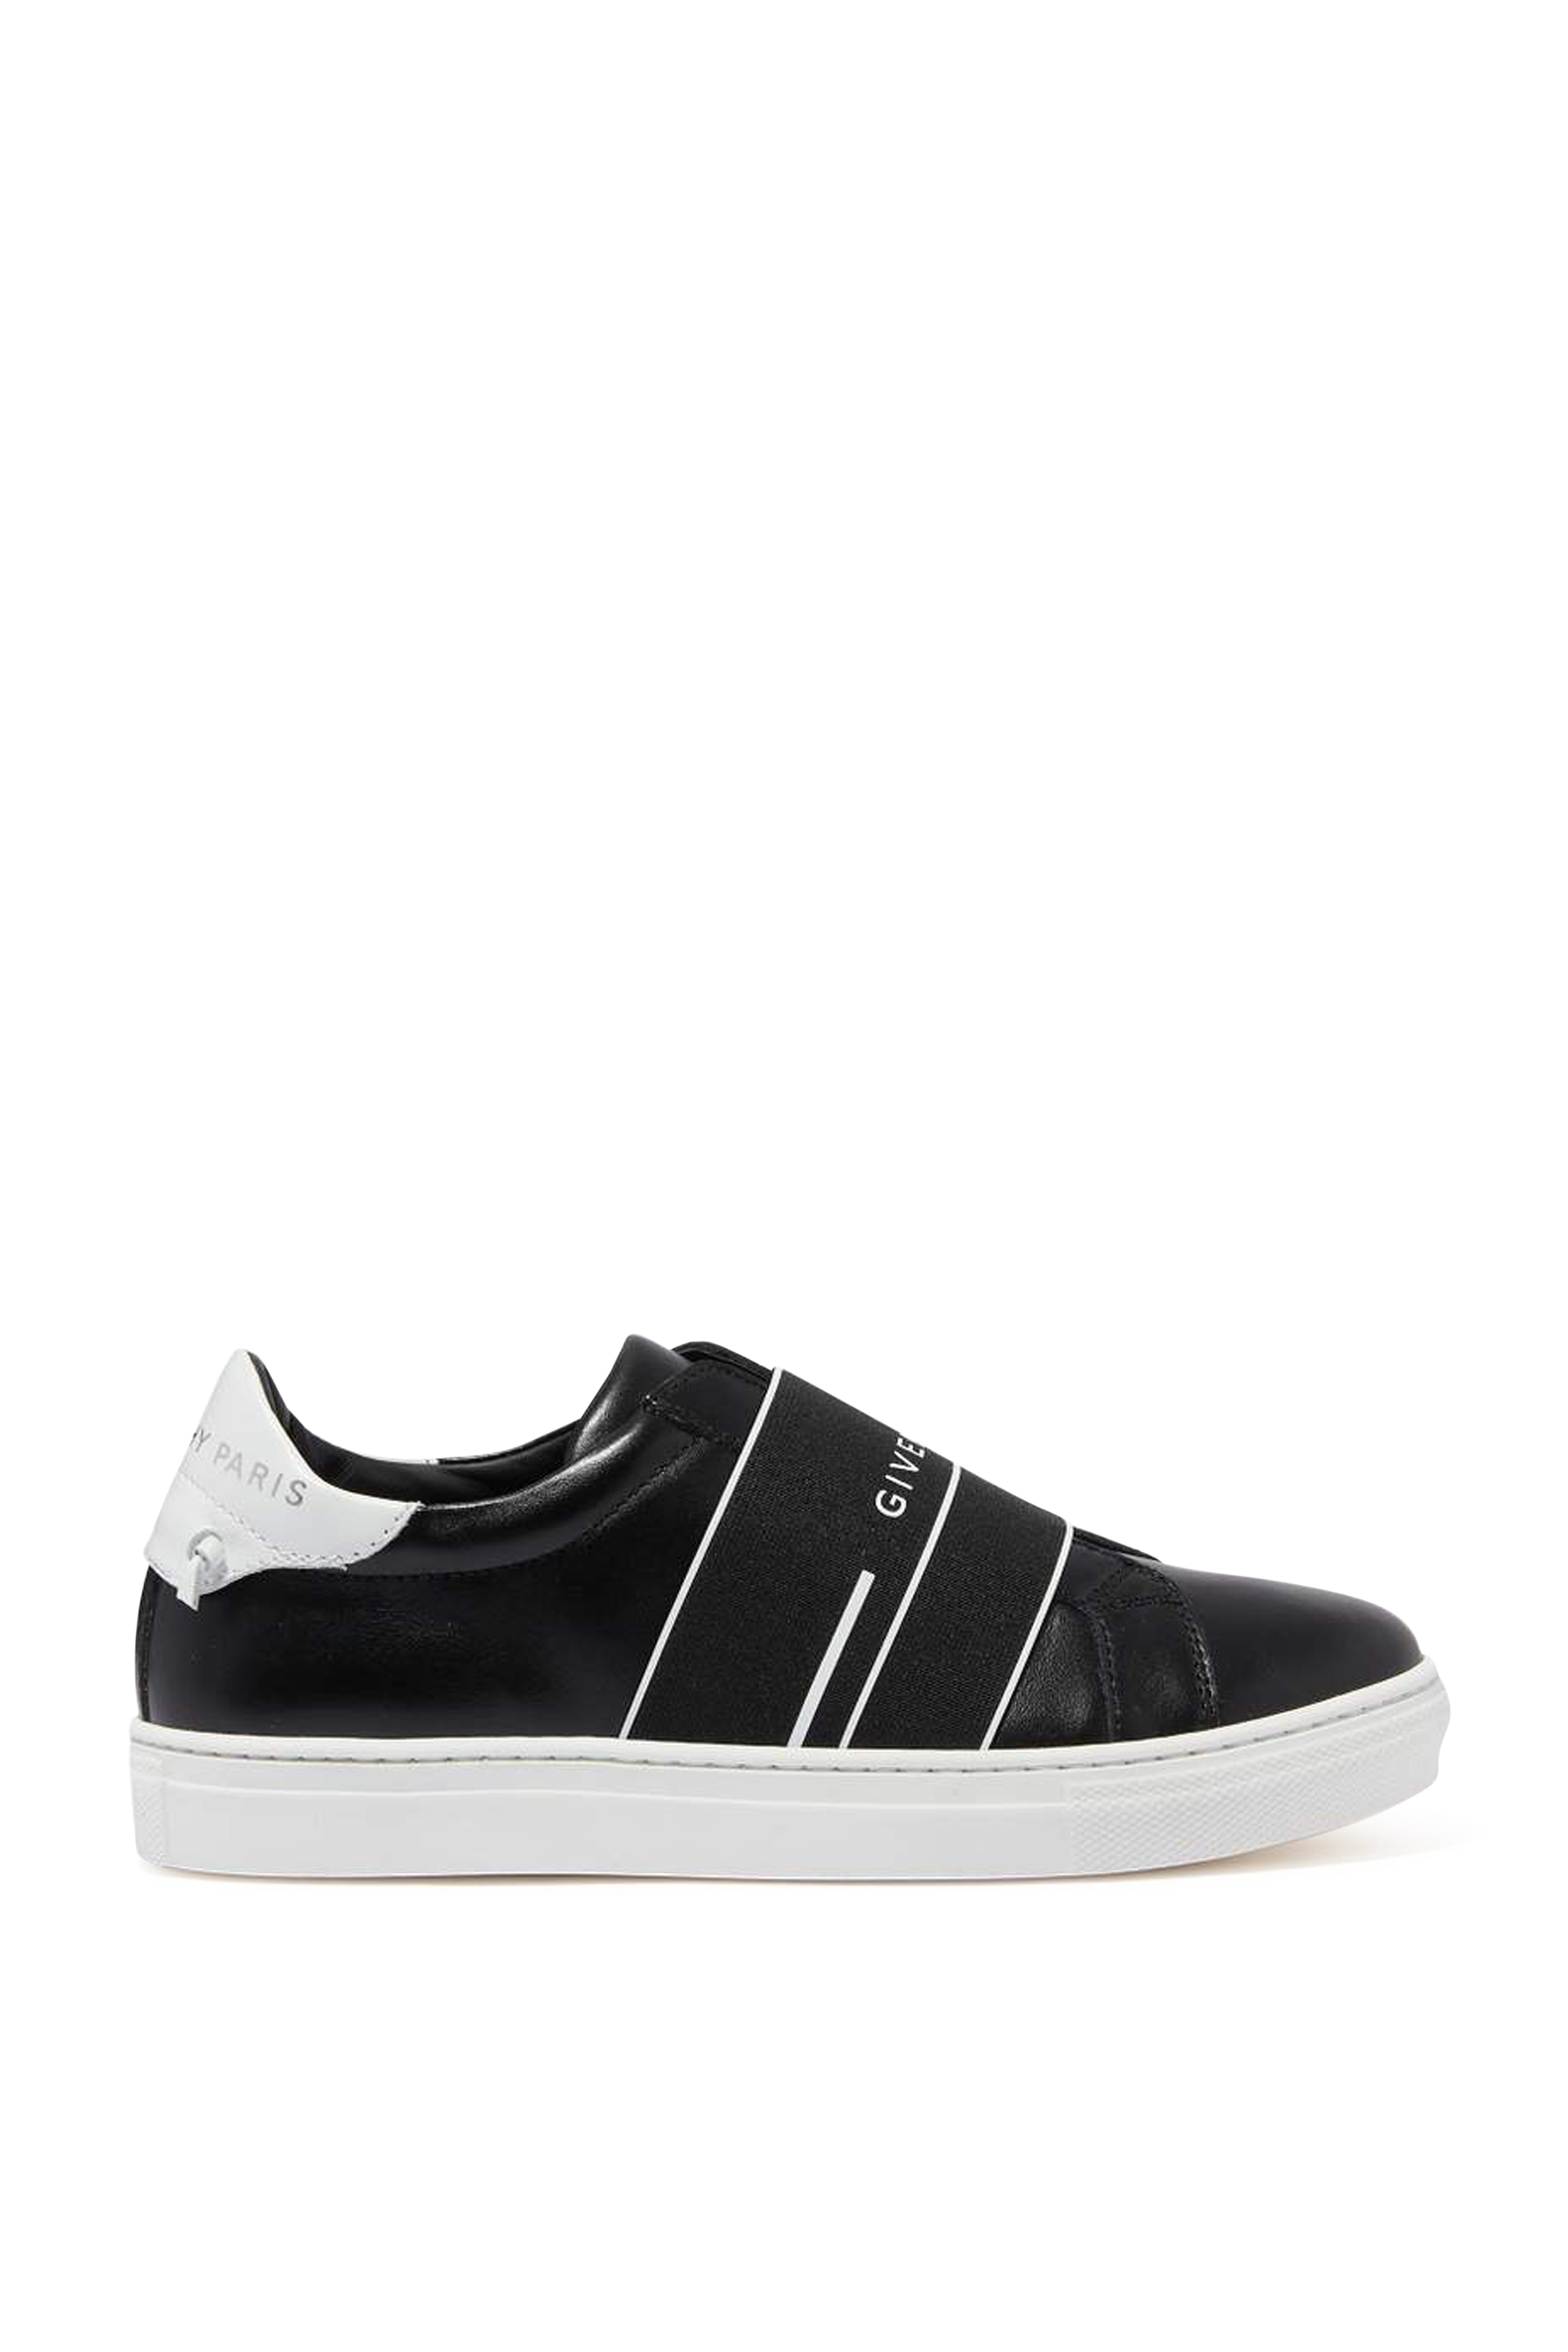 Buy Givenchy Logo Band Sneakers for 